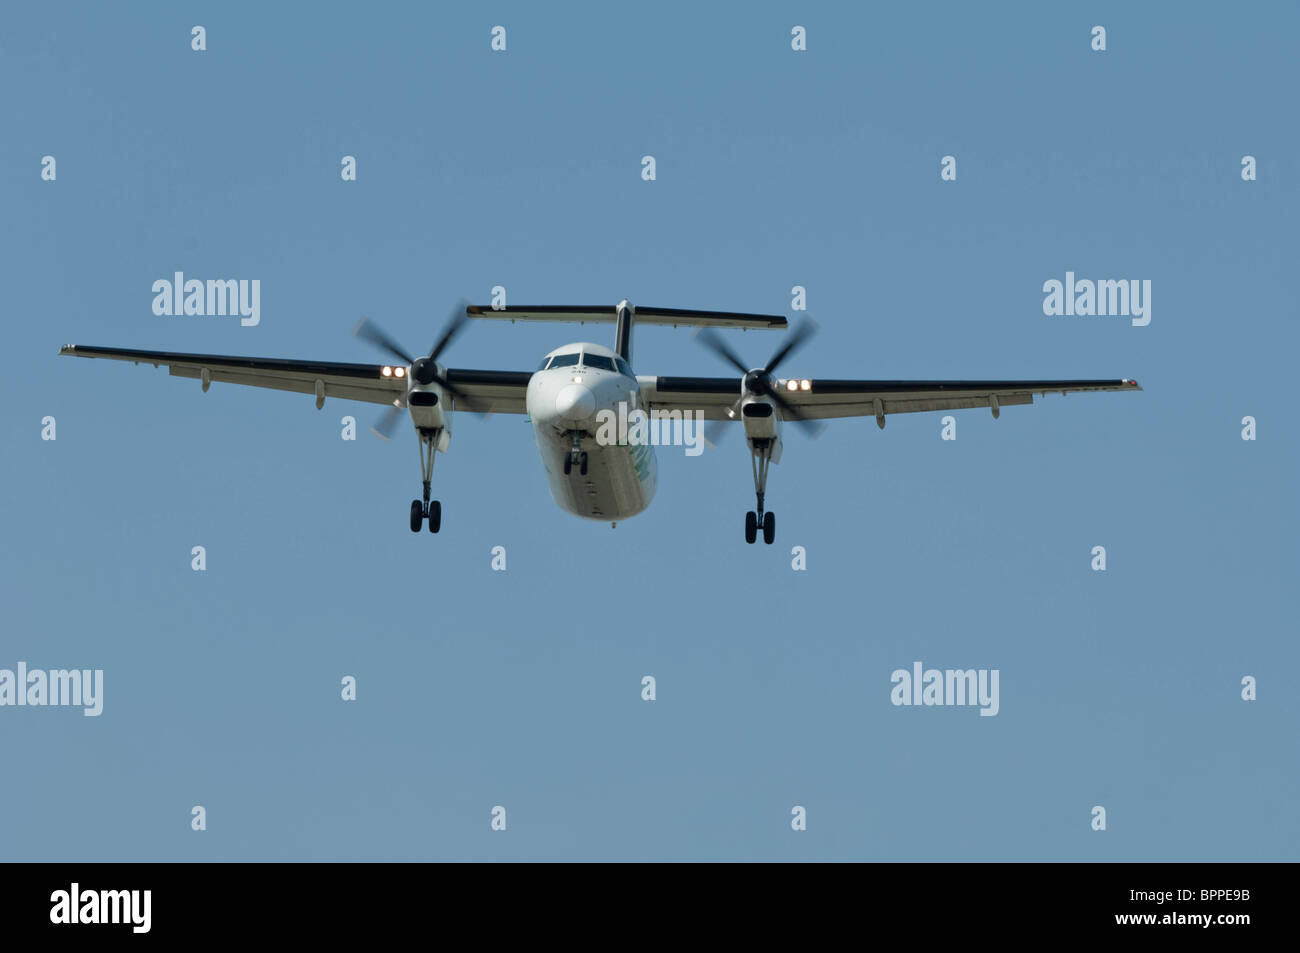 A Bombardier Dash-8 turboprop aircraft is on final approach to a runway with the landing down. Stock Photo